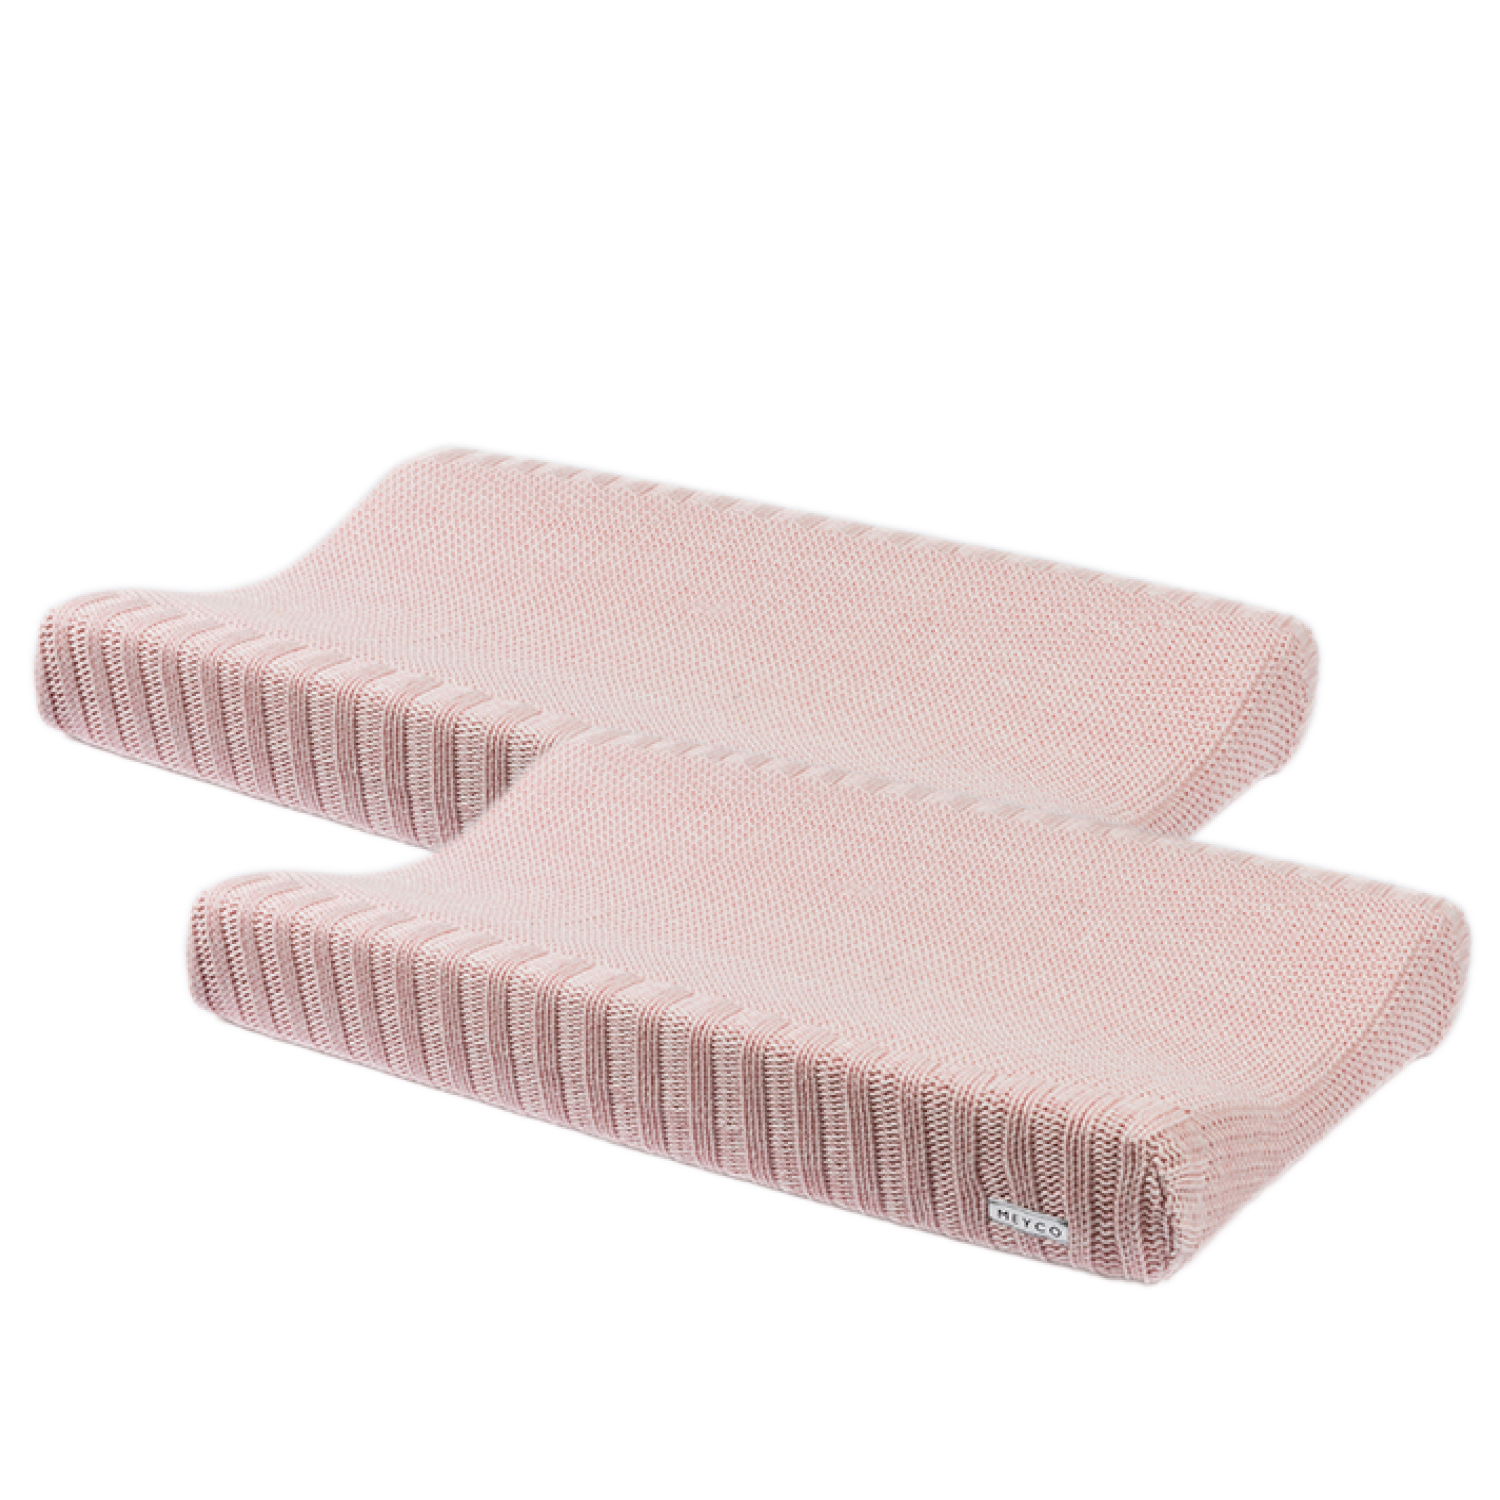 Changing mat cover 2-pack Relief Mixed - pink - 50x70cm